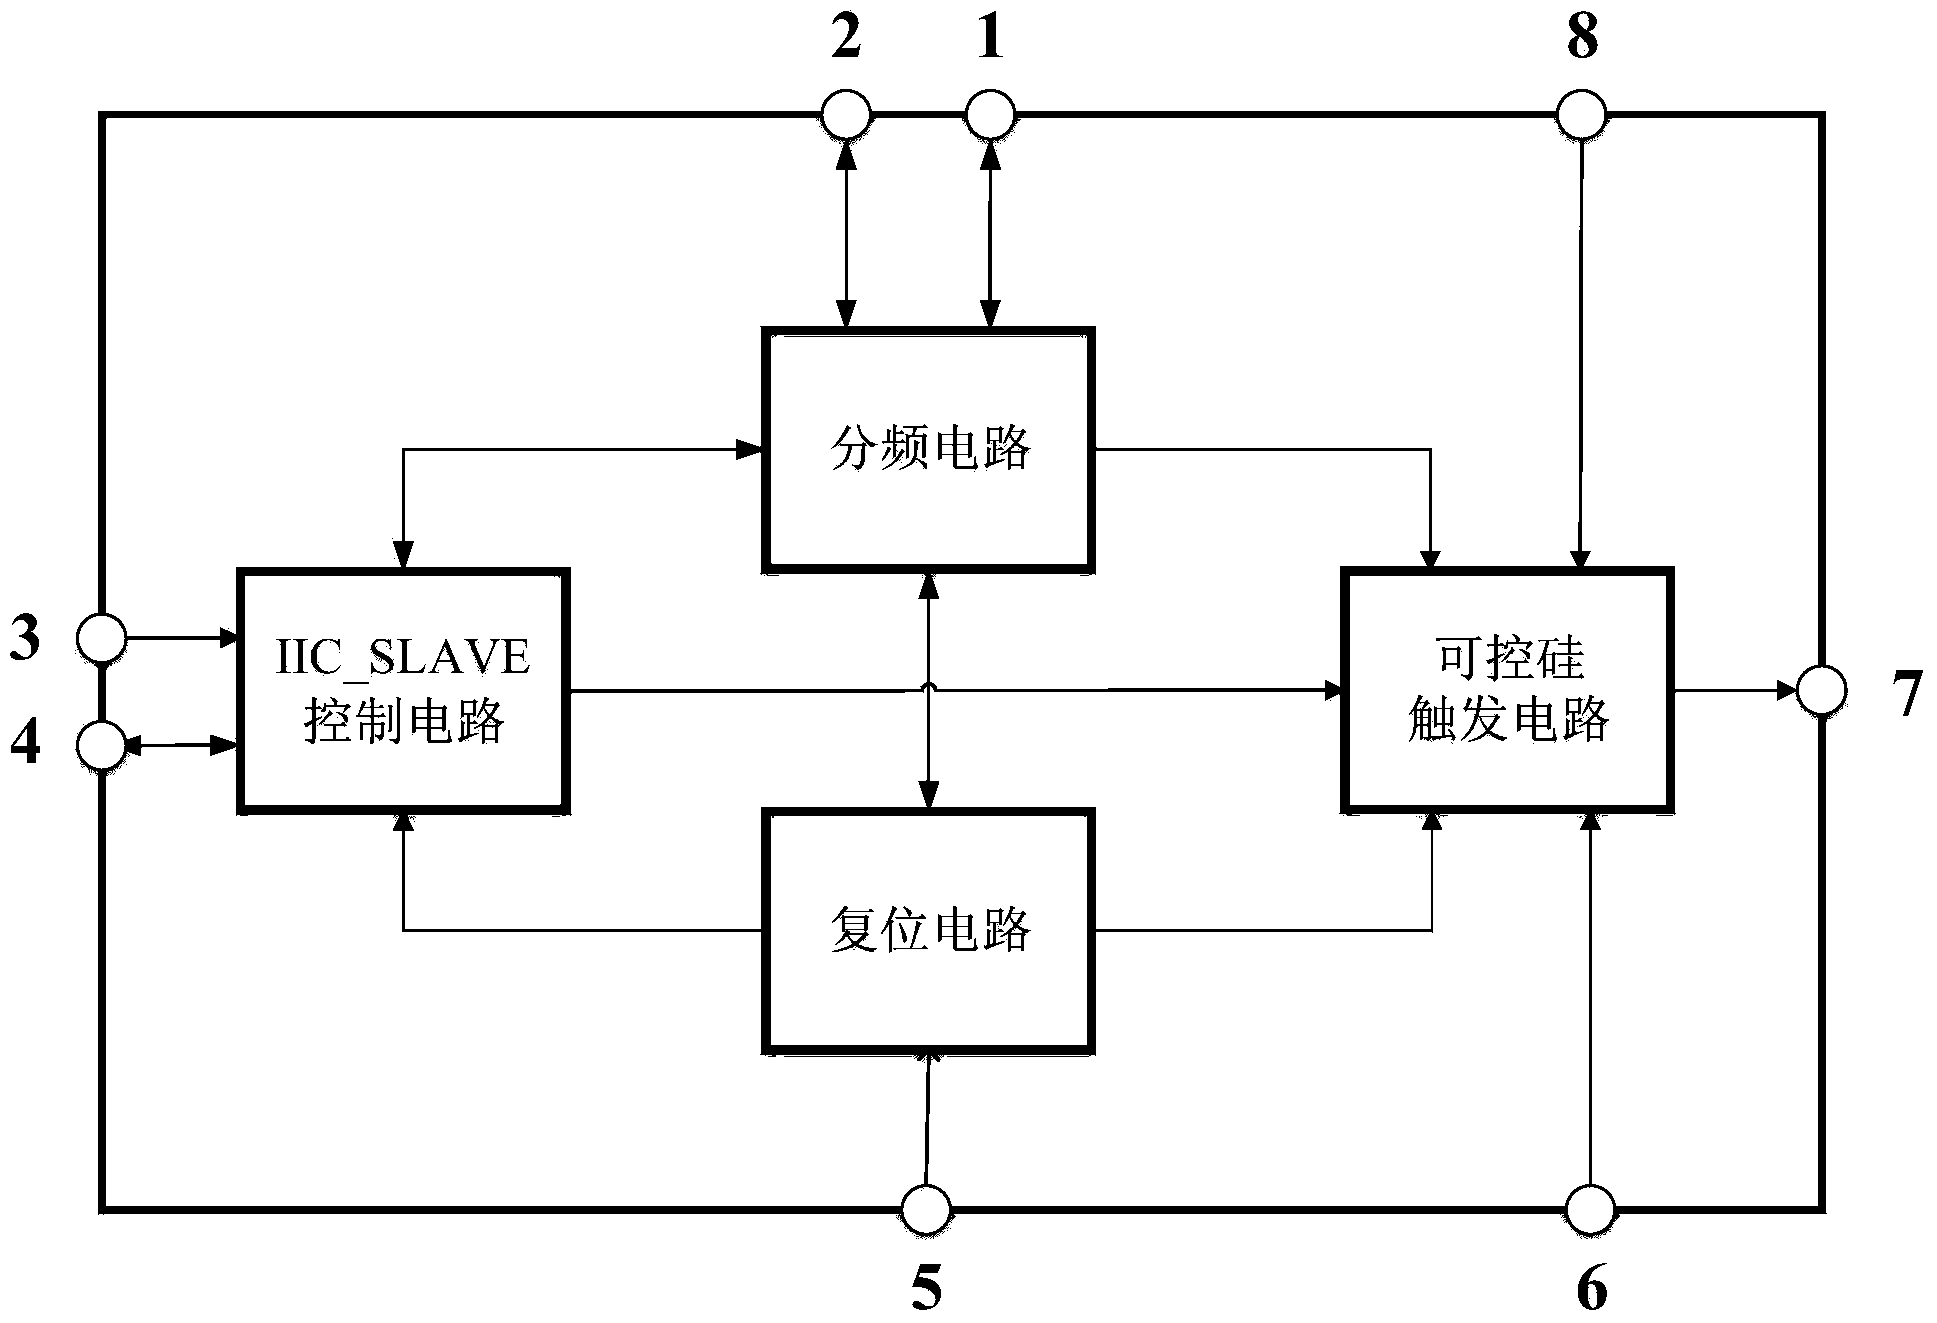 All-digital silicon controlled rectifier controller chip for three-phase alternating-current voltage regulation and rectification